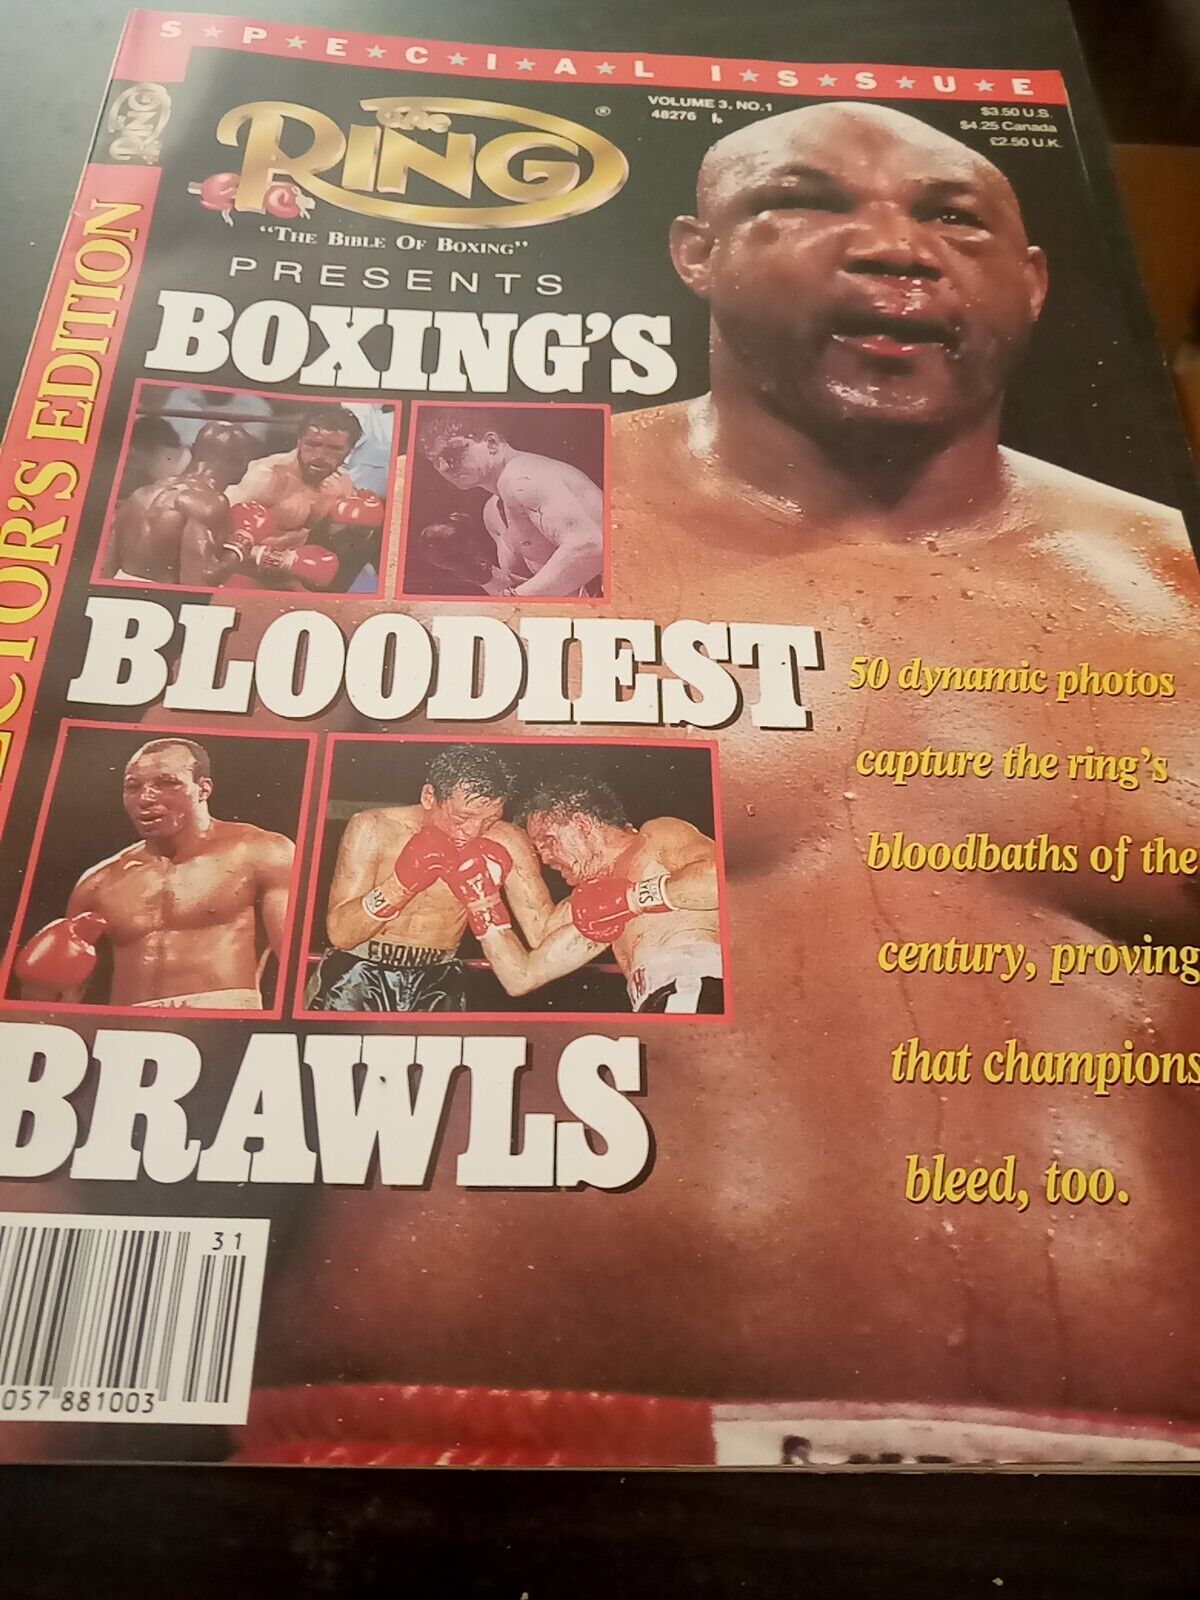 George Foreman 1993 Volume 3 #1 Special Issue The RING Boxing Magazine - Ex